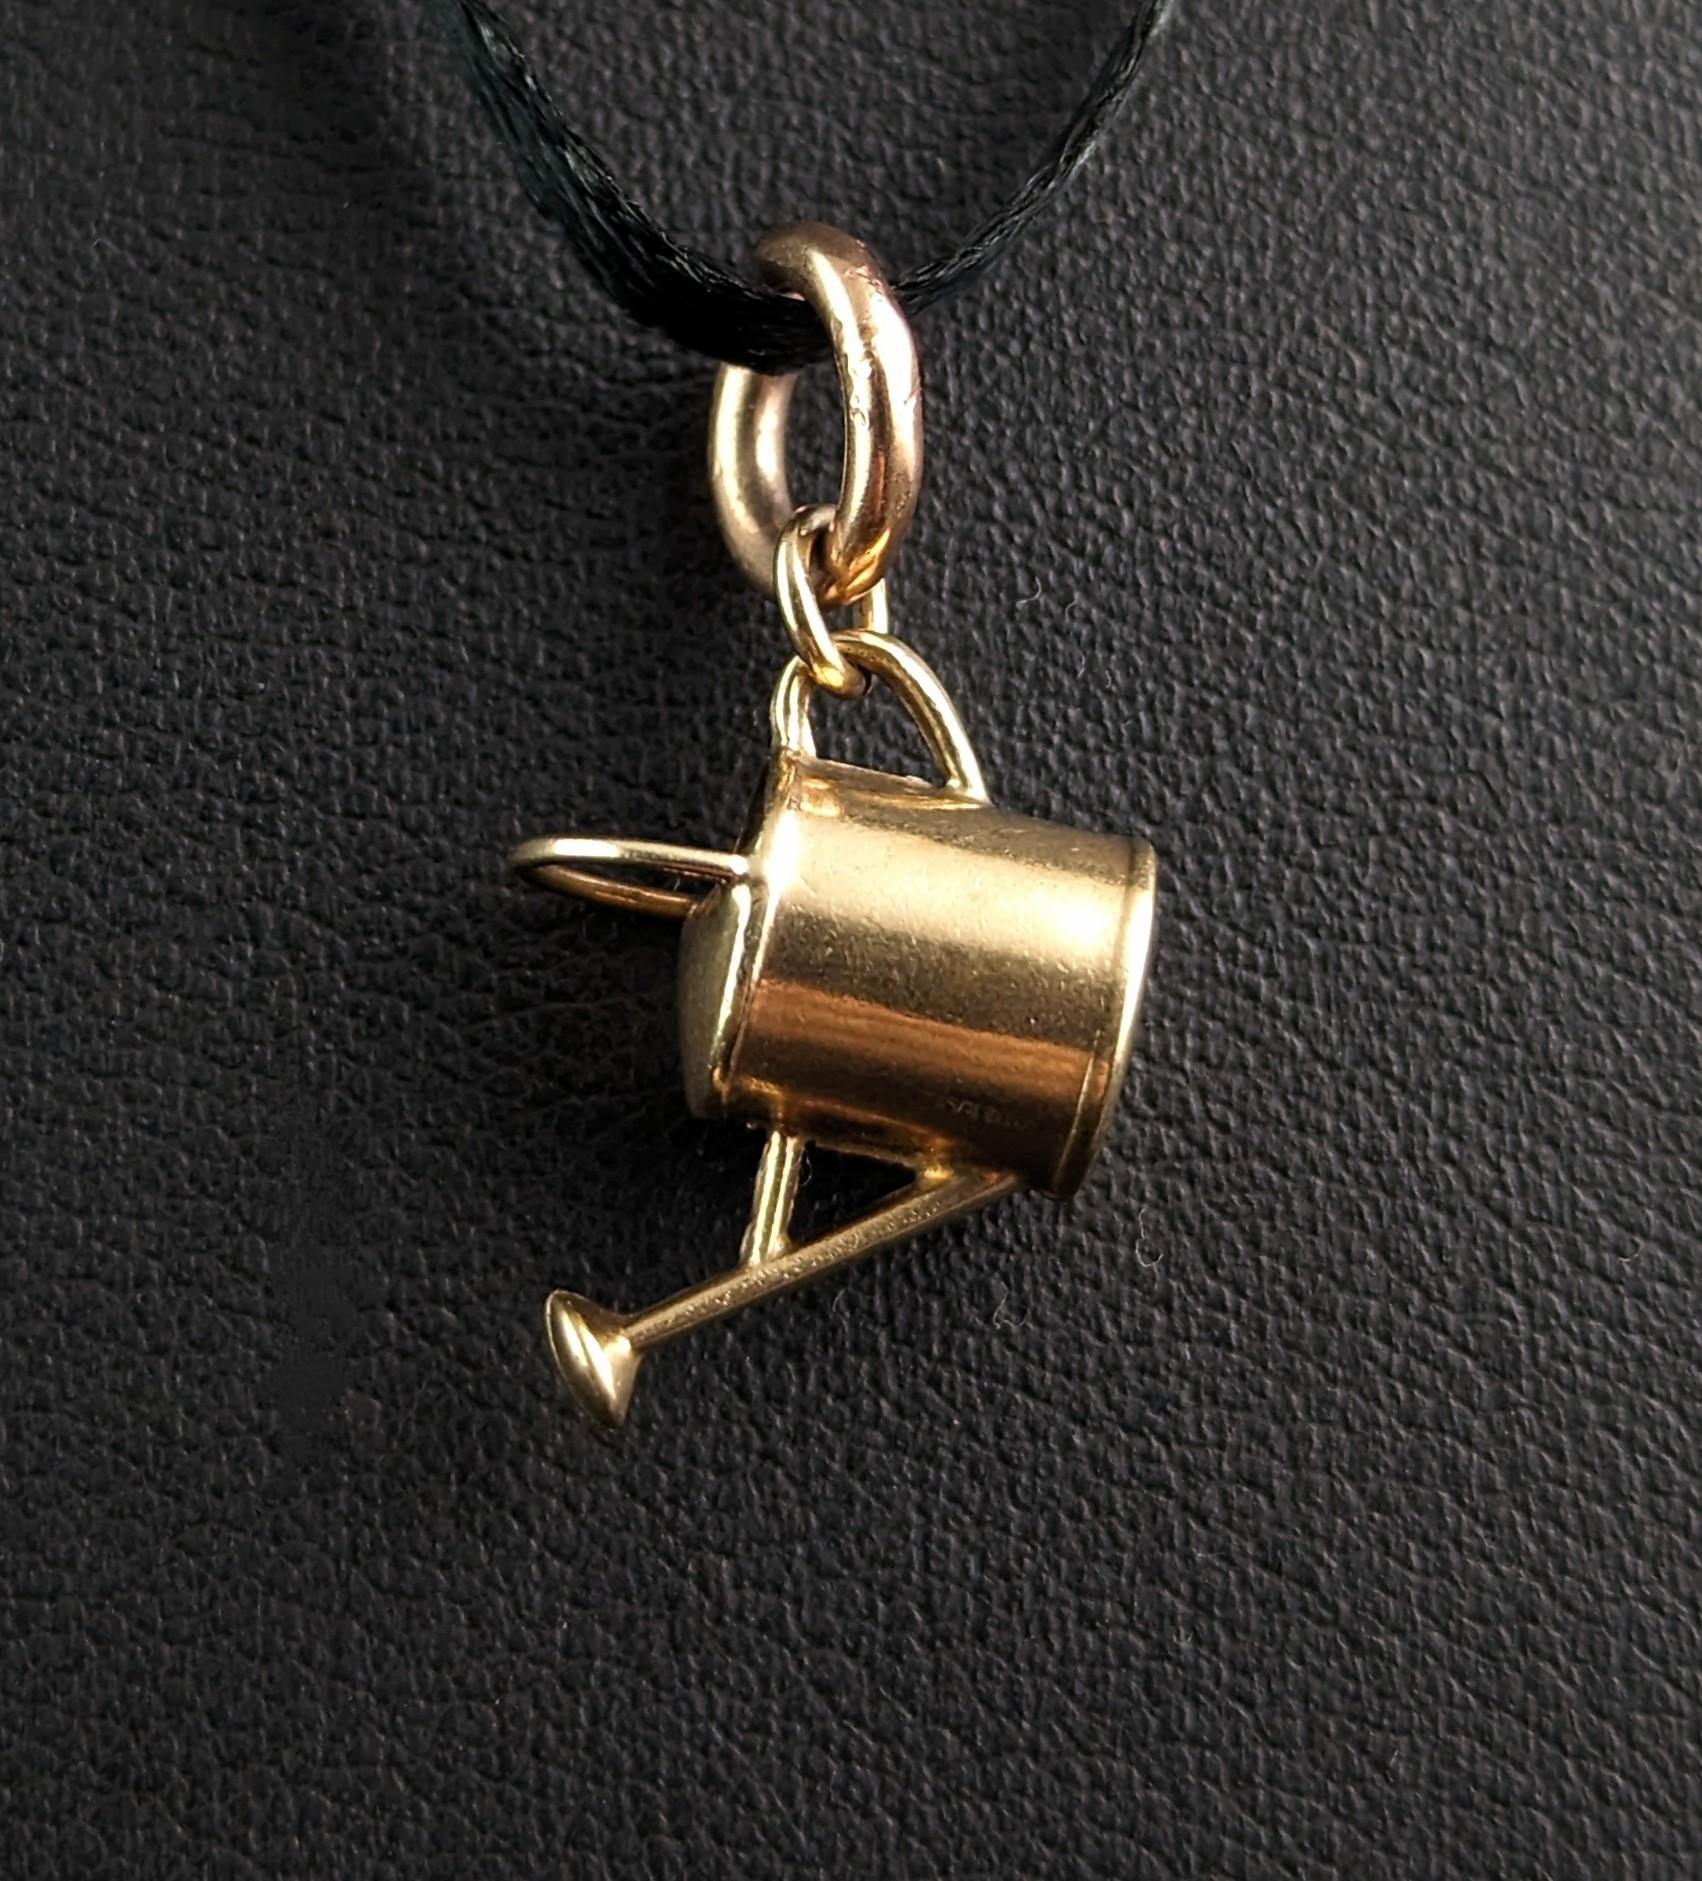 This little novelty vintage 9ct gold charm or pendant is really fun and sweet!

It is finely modelled in rich 9ct yellow gold as a little watering can, the perfect gift for the avid gardener or green fingered friend.

The charm is a mid-century